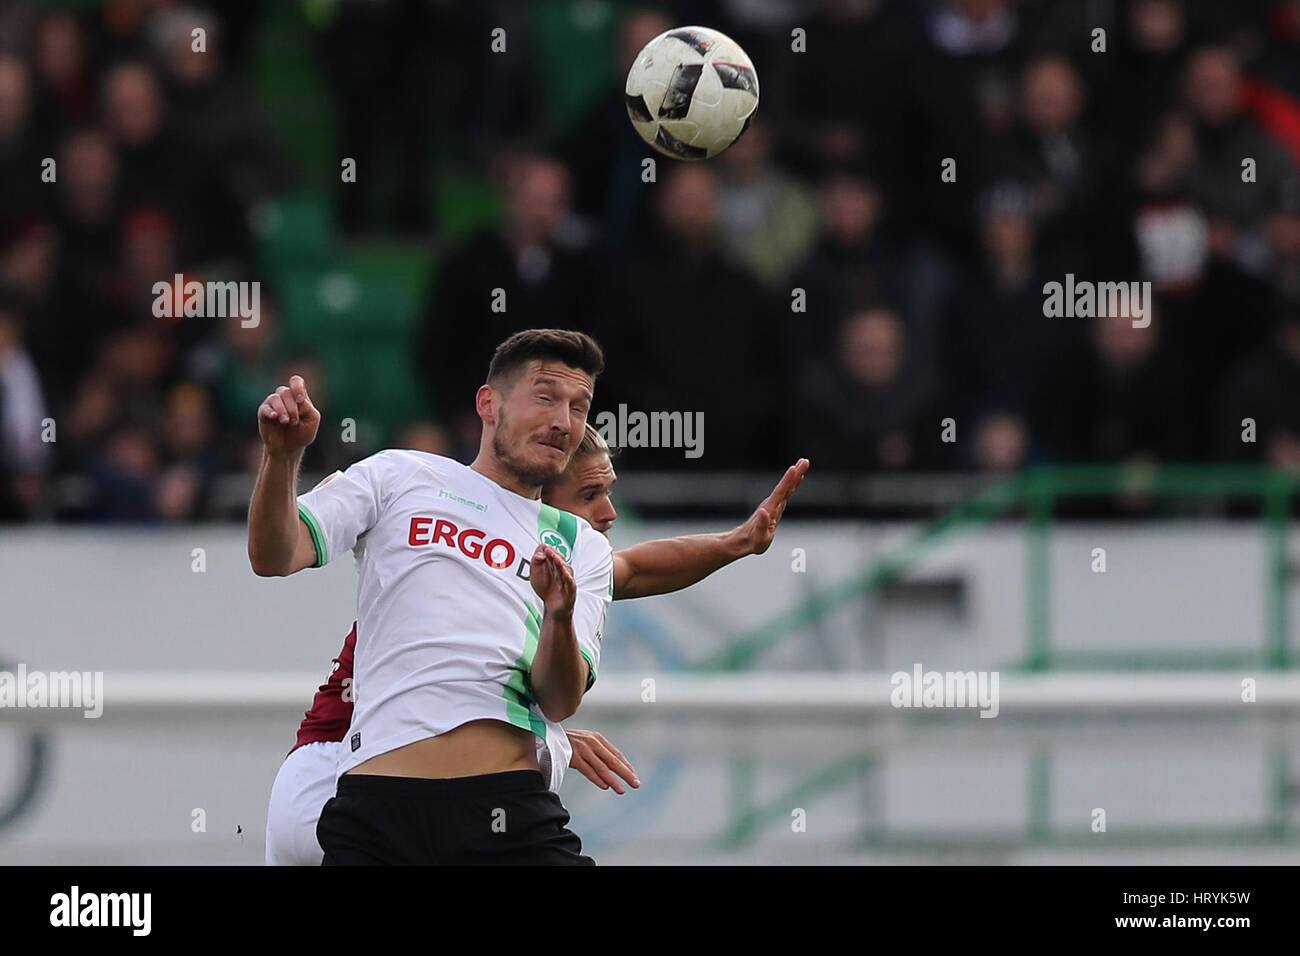 Fuerth, Germany. 5th Mar, 2017. Fuerth's Adam Pinter (front) and Nuremberg's Rurik Gislason in action during the 2nd Bundesliga soccer match between SpVgg Greuther Fuerth and 1. FC Nuremberg at the Stadion am Laubenweg in Fuerth, Germany, 5 March 2017. (EMBARGO CONDITIONS - ATTENTION: Due to the accreditation guidlines, the DFL only permits the publication and utilisation of up to 15 pictures per match on the internet and in online media during the match.) Photo: Daniel Karmann/dpa/Alamy Live News Stock Photo